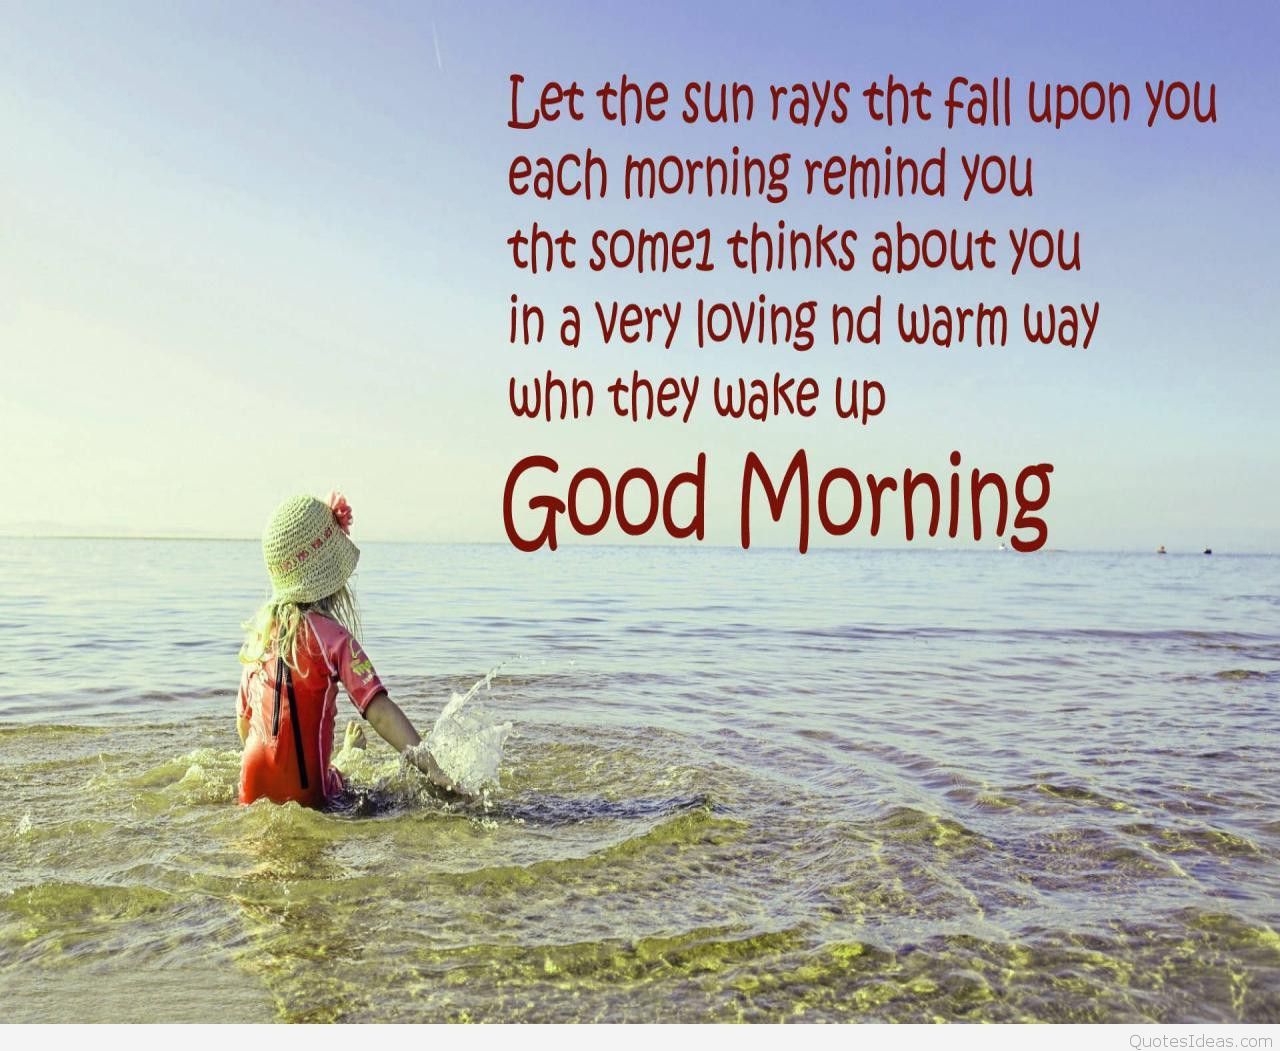 Wishes good morning cards quotes sayings hd